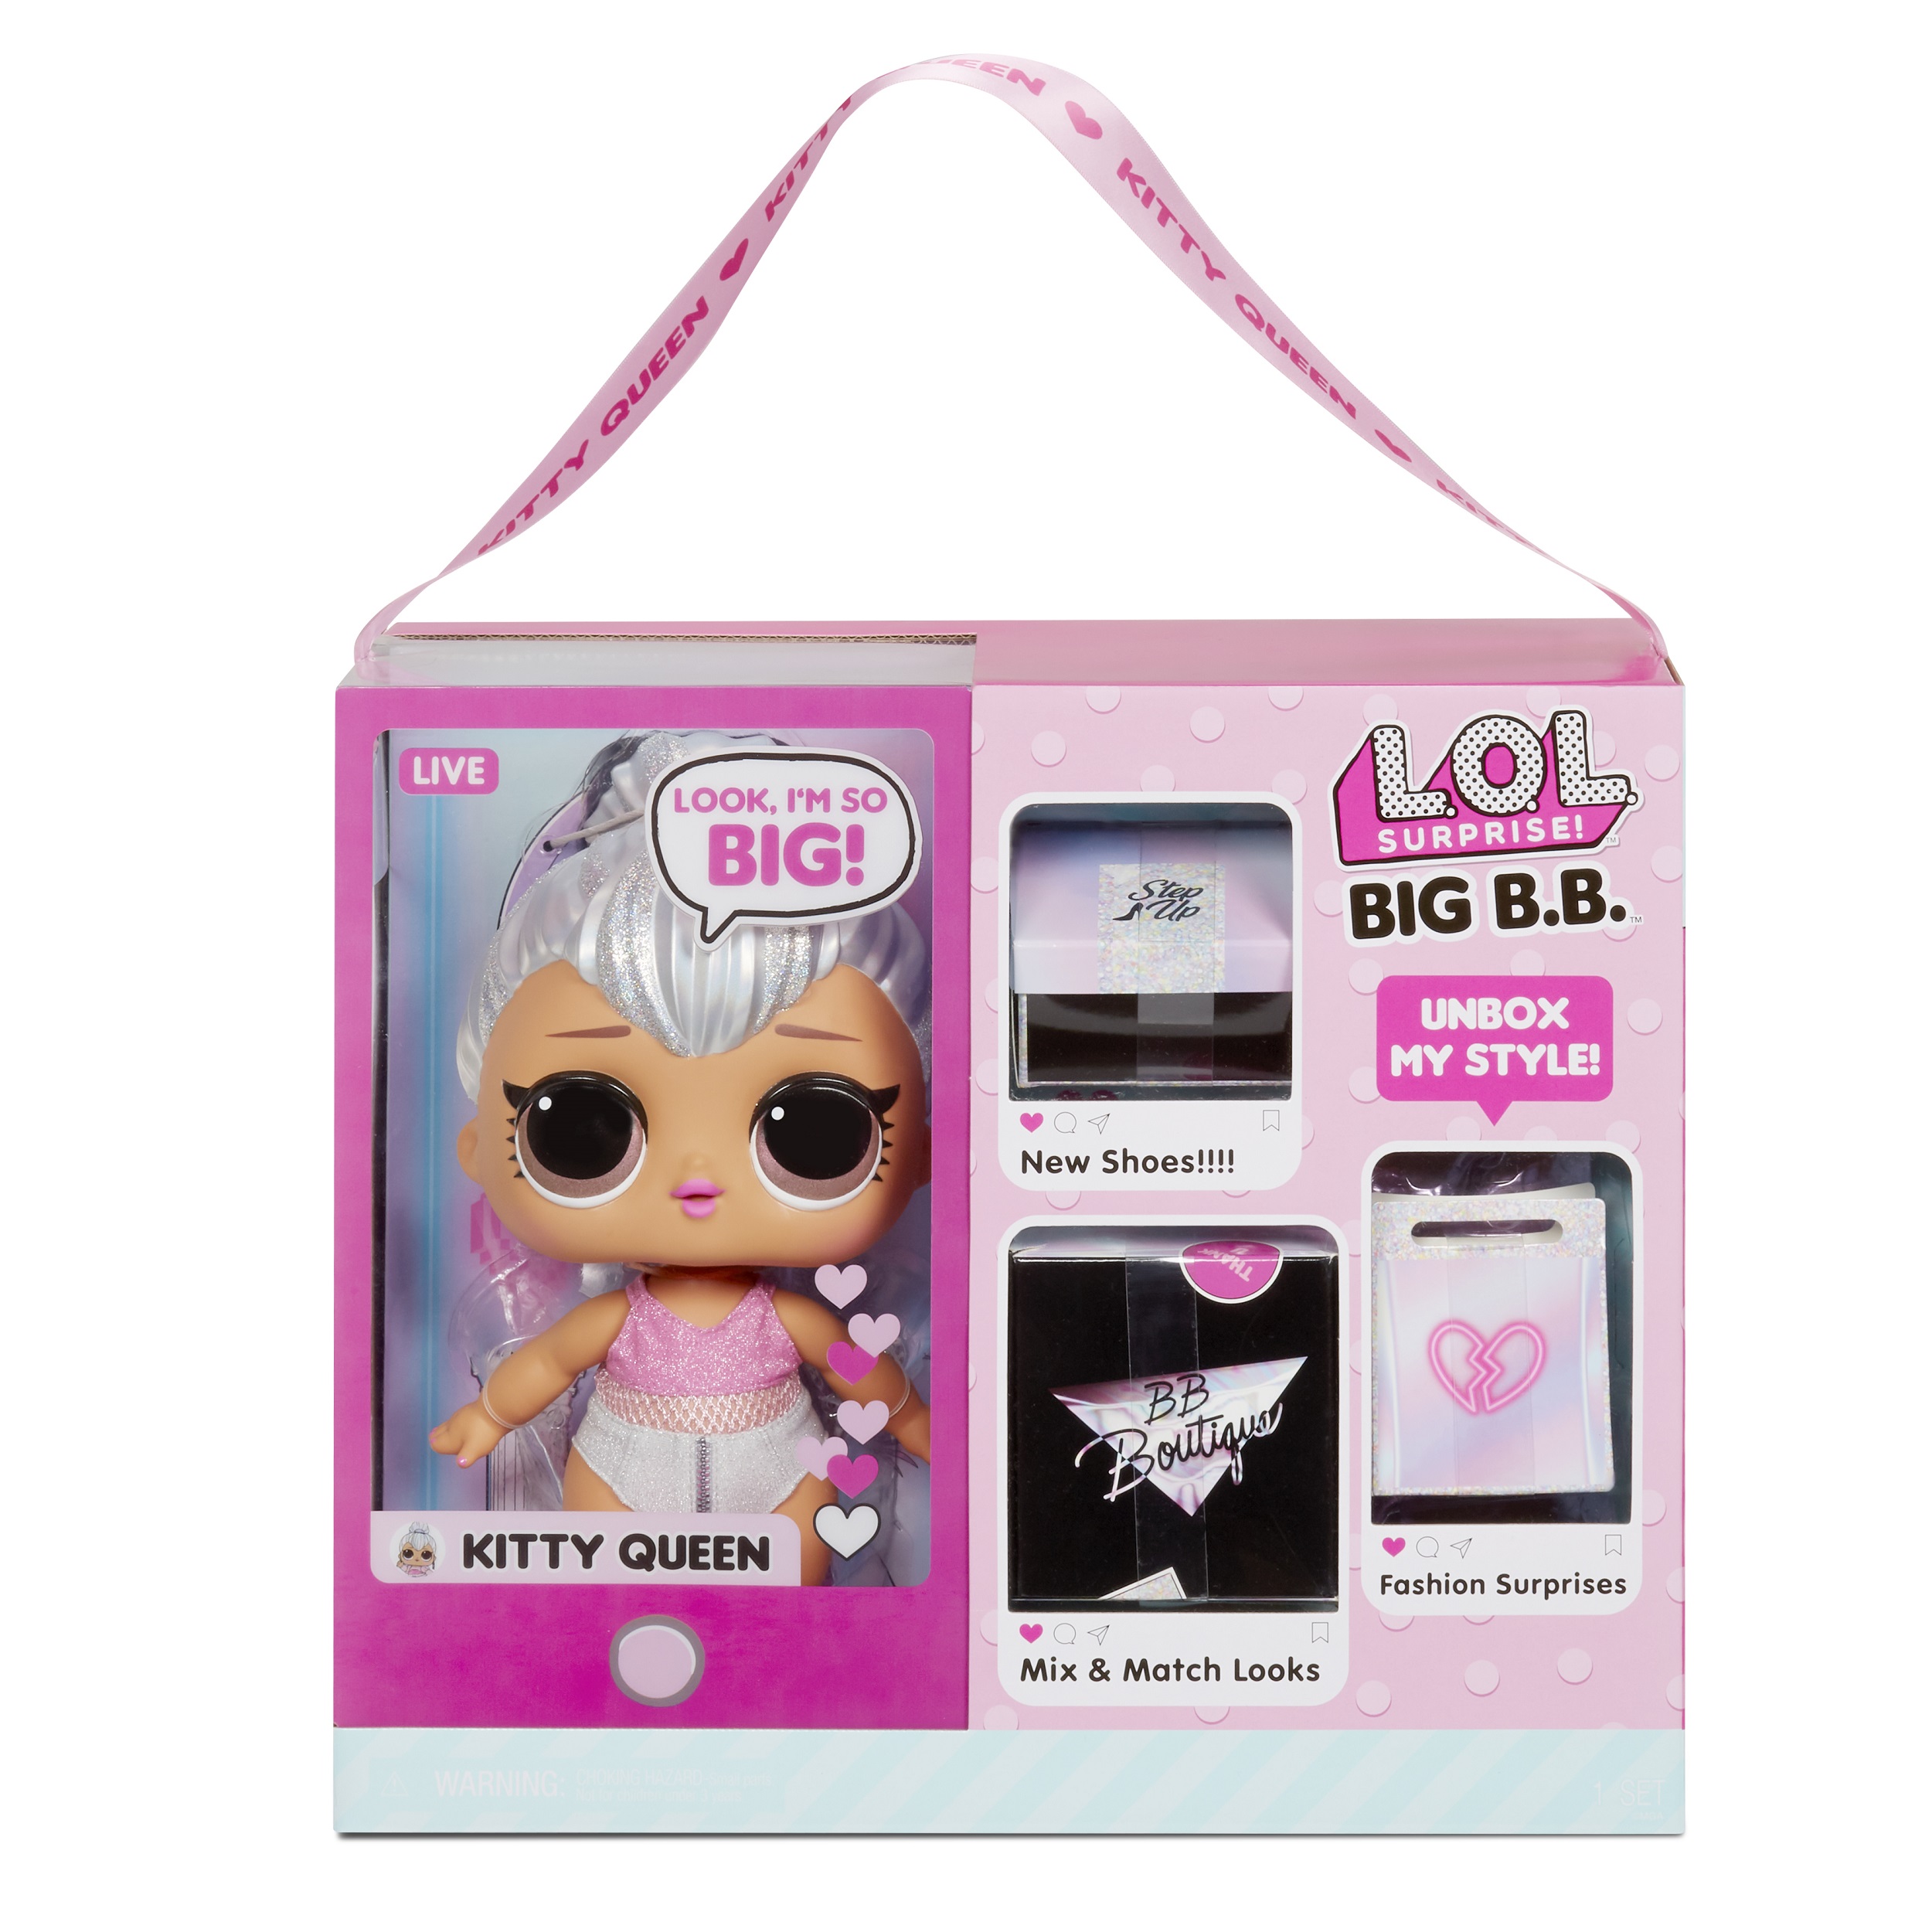 LOL Surprise Big B.B. (Big Baby) Kitty Queen – 12" Large Doll, Unbox Fashions, Shoes, Accessories, Includes Playset Desk, Chair and Backdrop - image 3 of 7